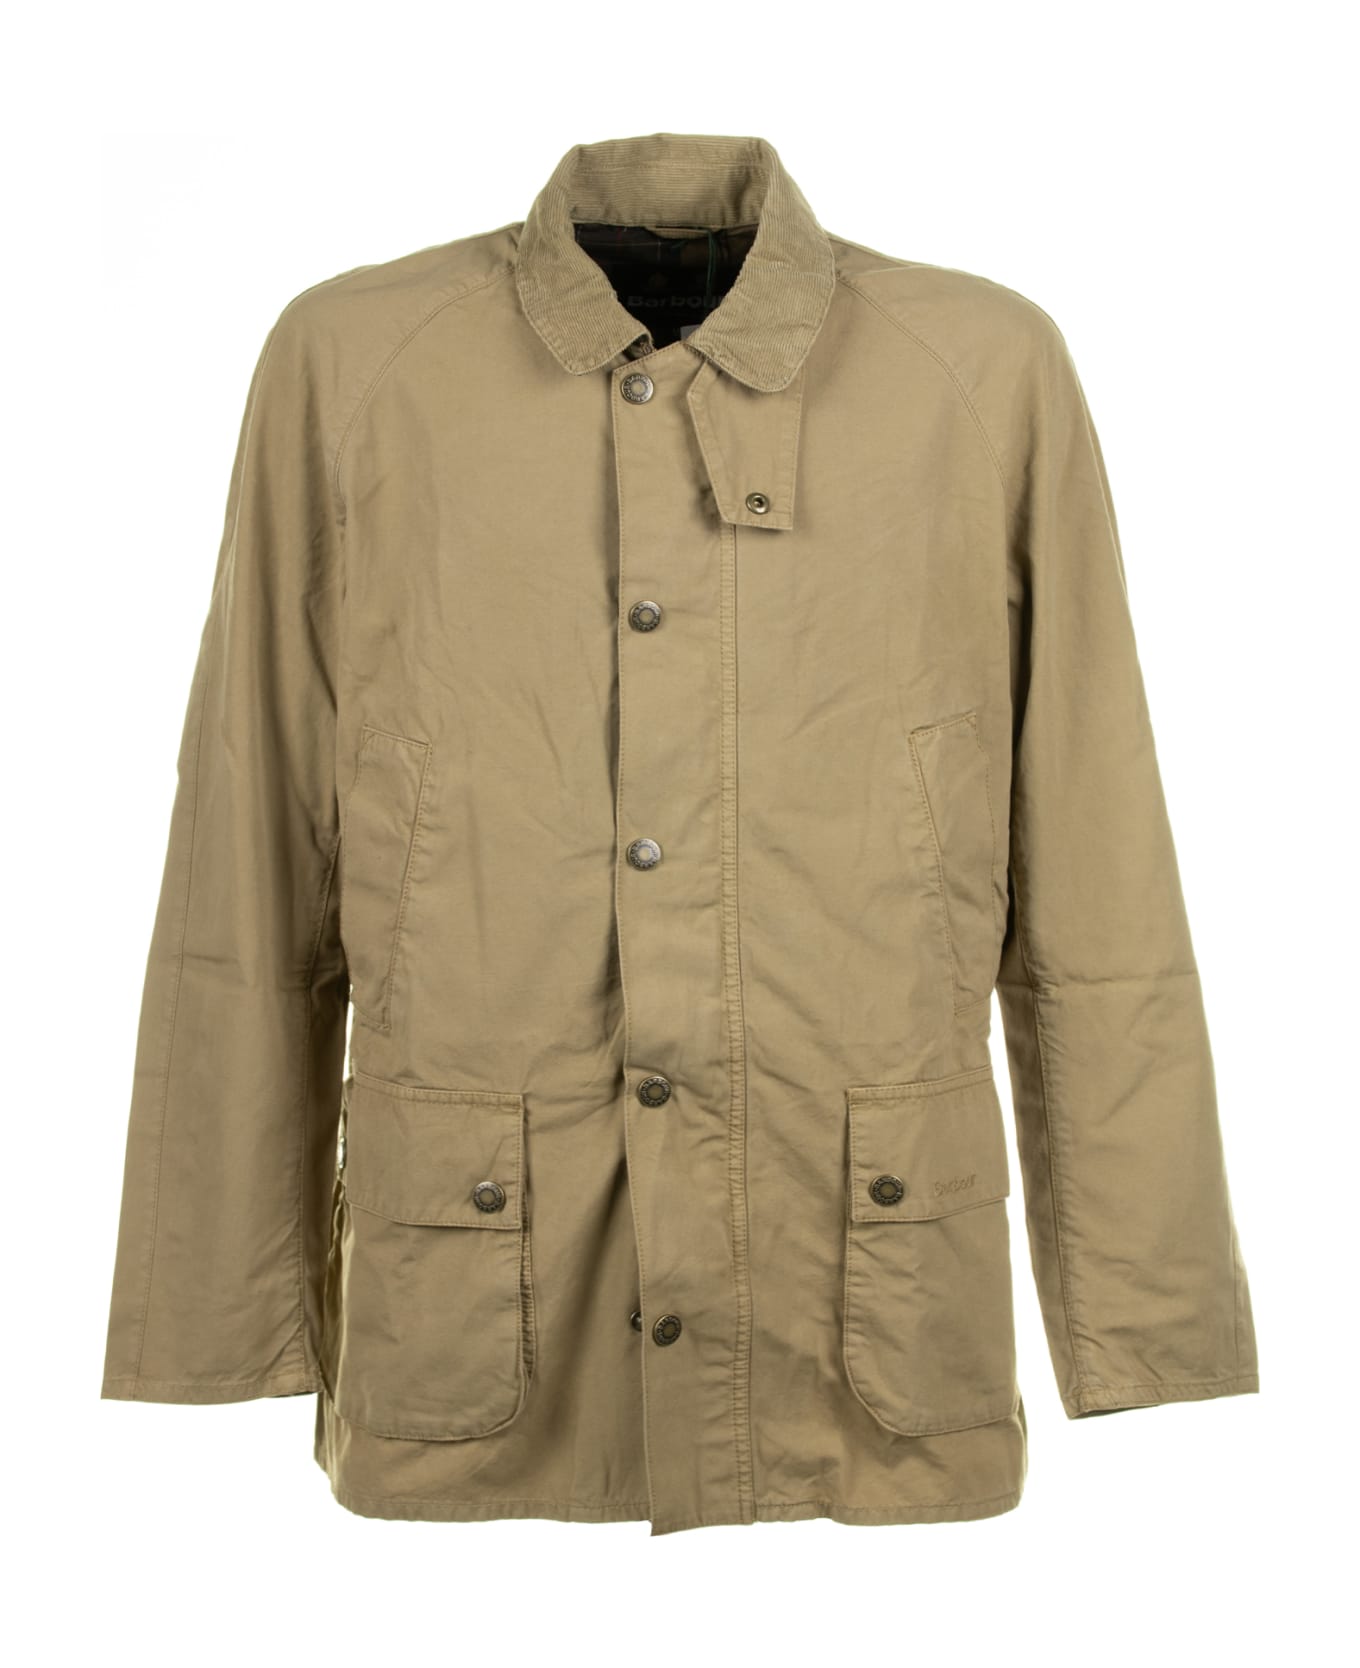 Barbour Cotton Jacket With Pockets And Buttons - STONE ジャケット